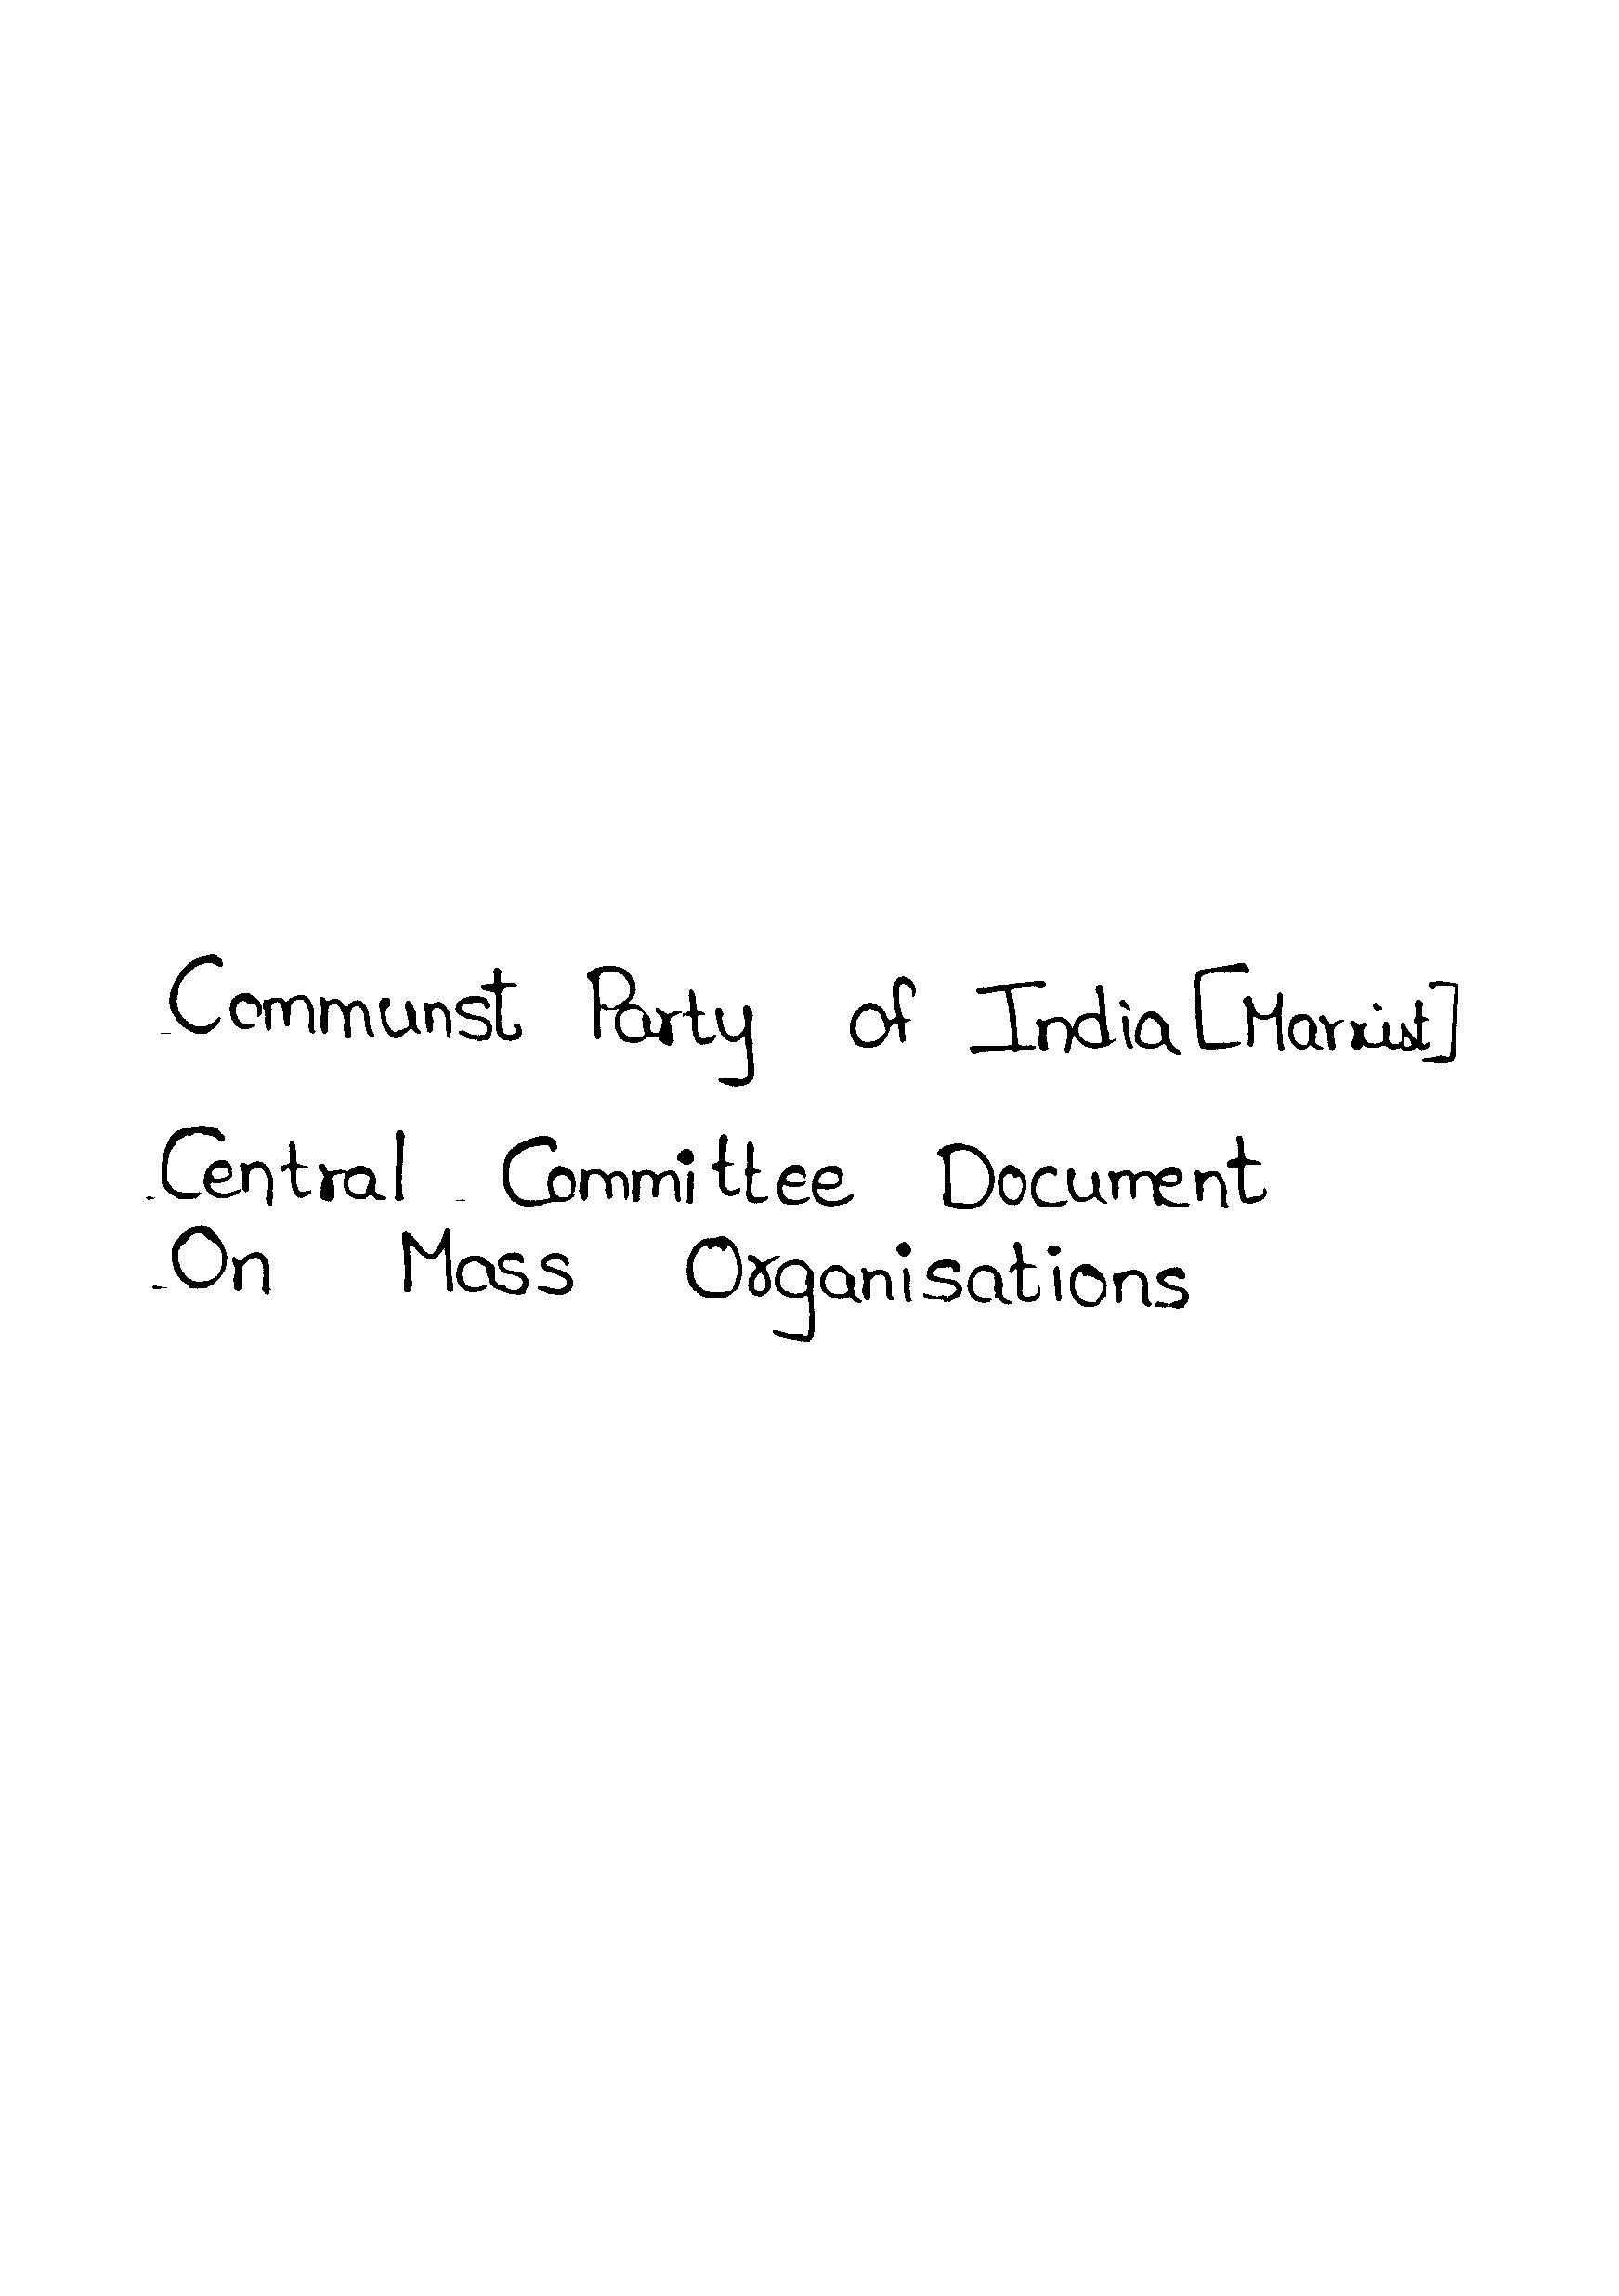 Communst party of india (marxist) central committe document on moss organisations